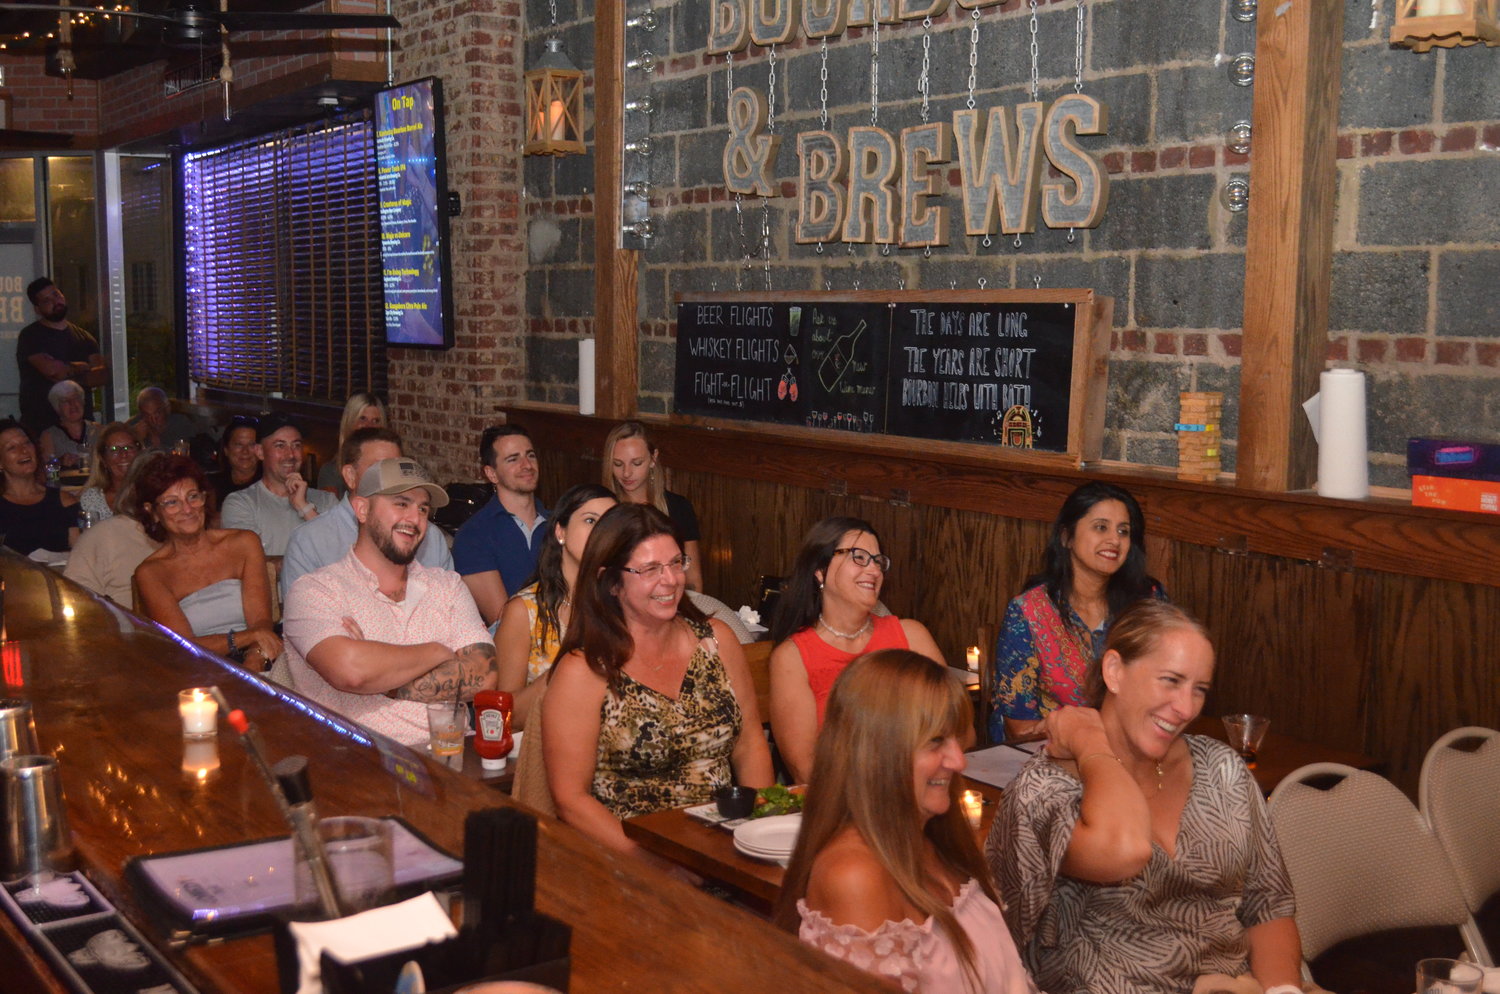 Bourbon & Brews, a local eatery well known for its charitable ways, is gearing up to host a charity comedy night to benefit St. Jude Children’s Research Hospital.